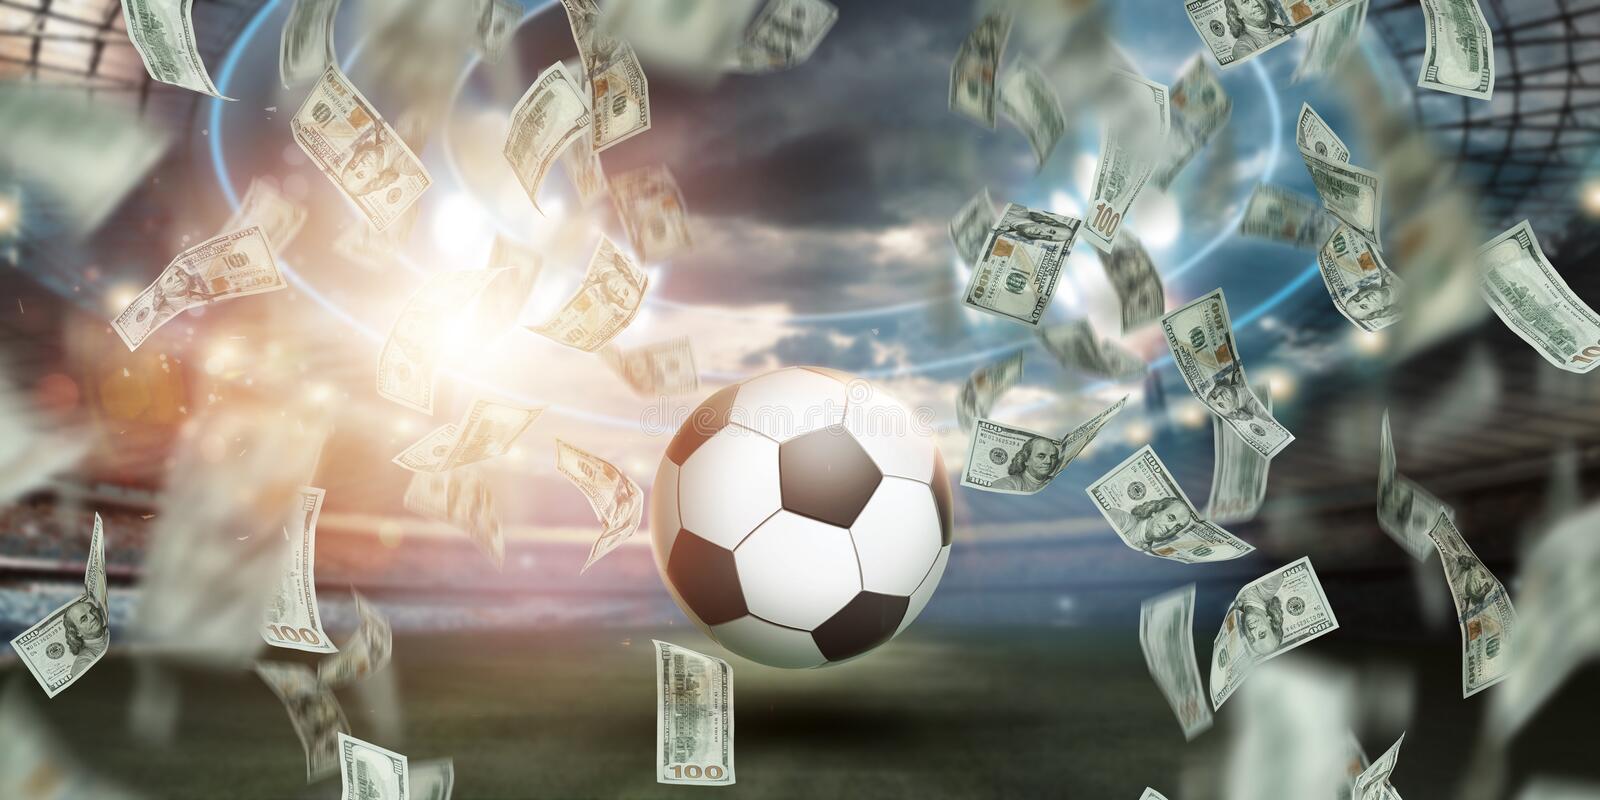 Know More About The Top 3 Football Betting Websites